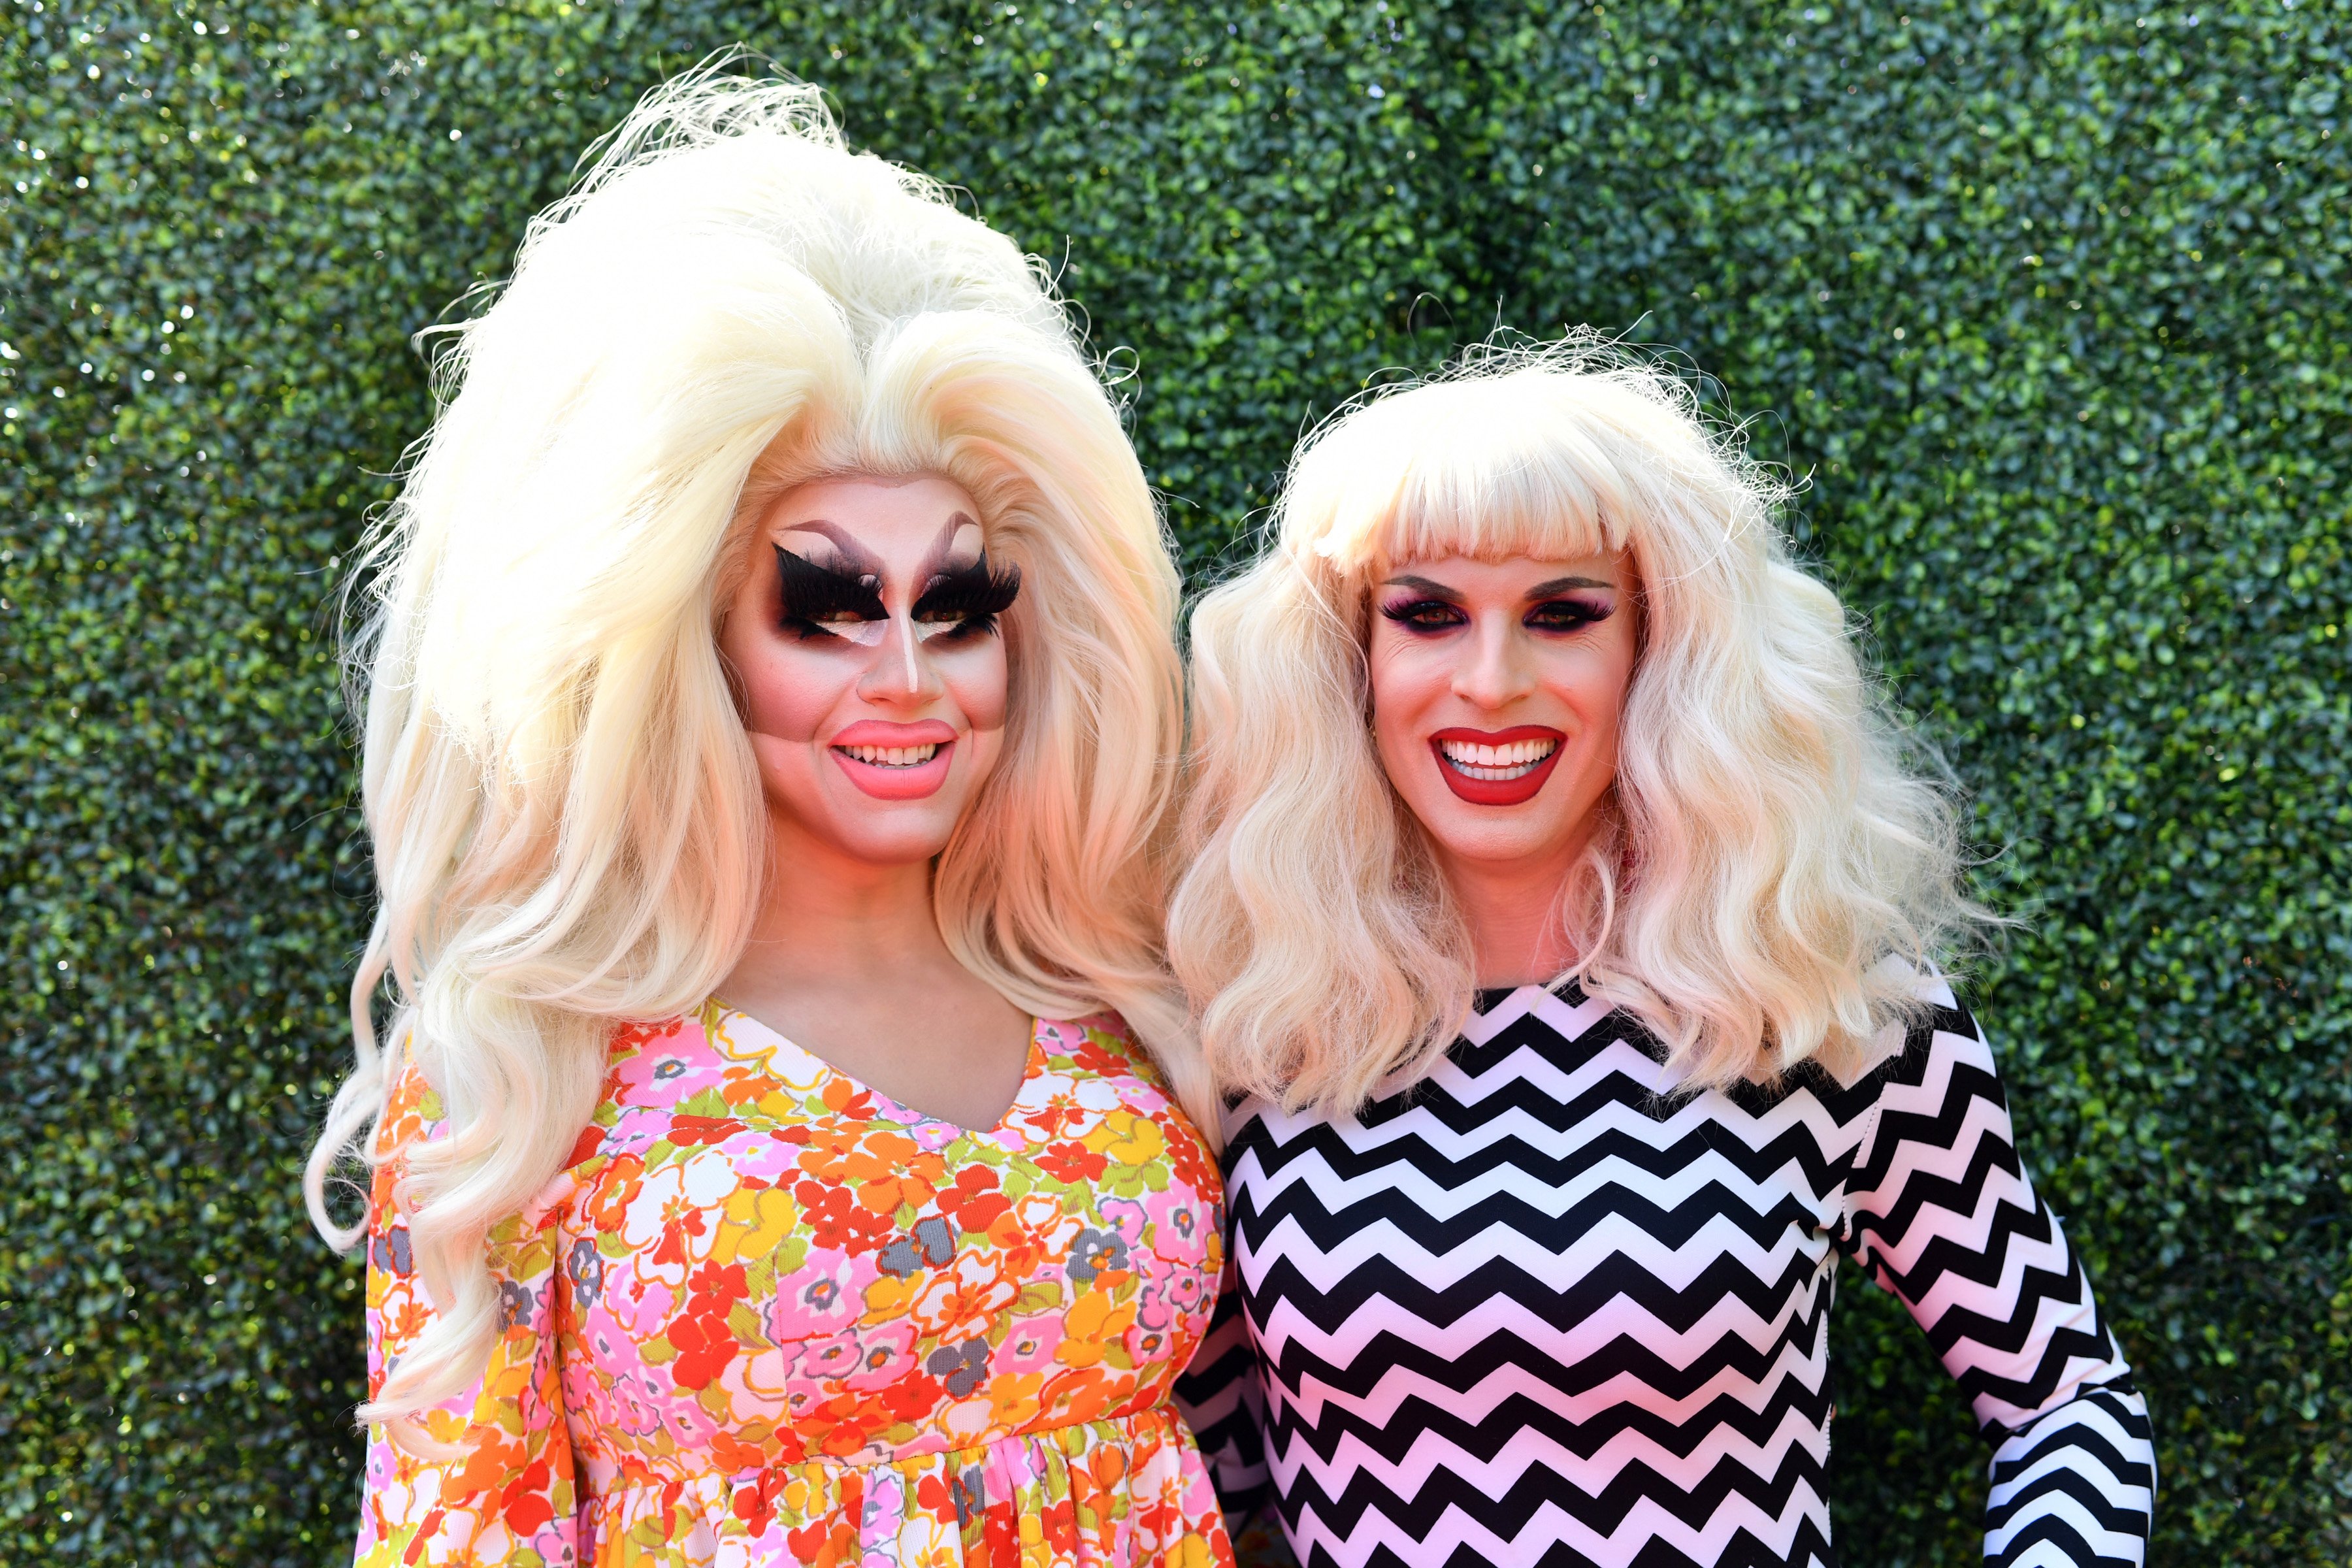 Trixie Mattel and Katya attend the 2019 MTV Movie and TV Awards